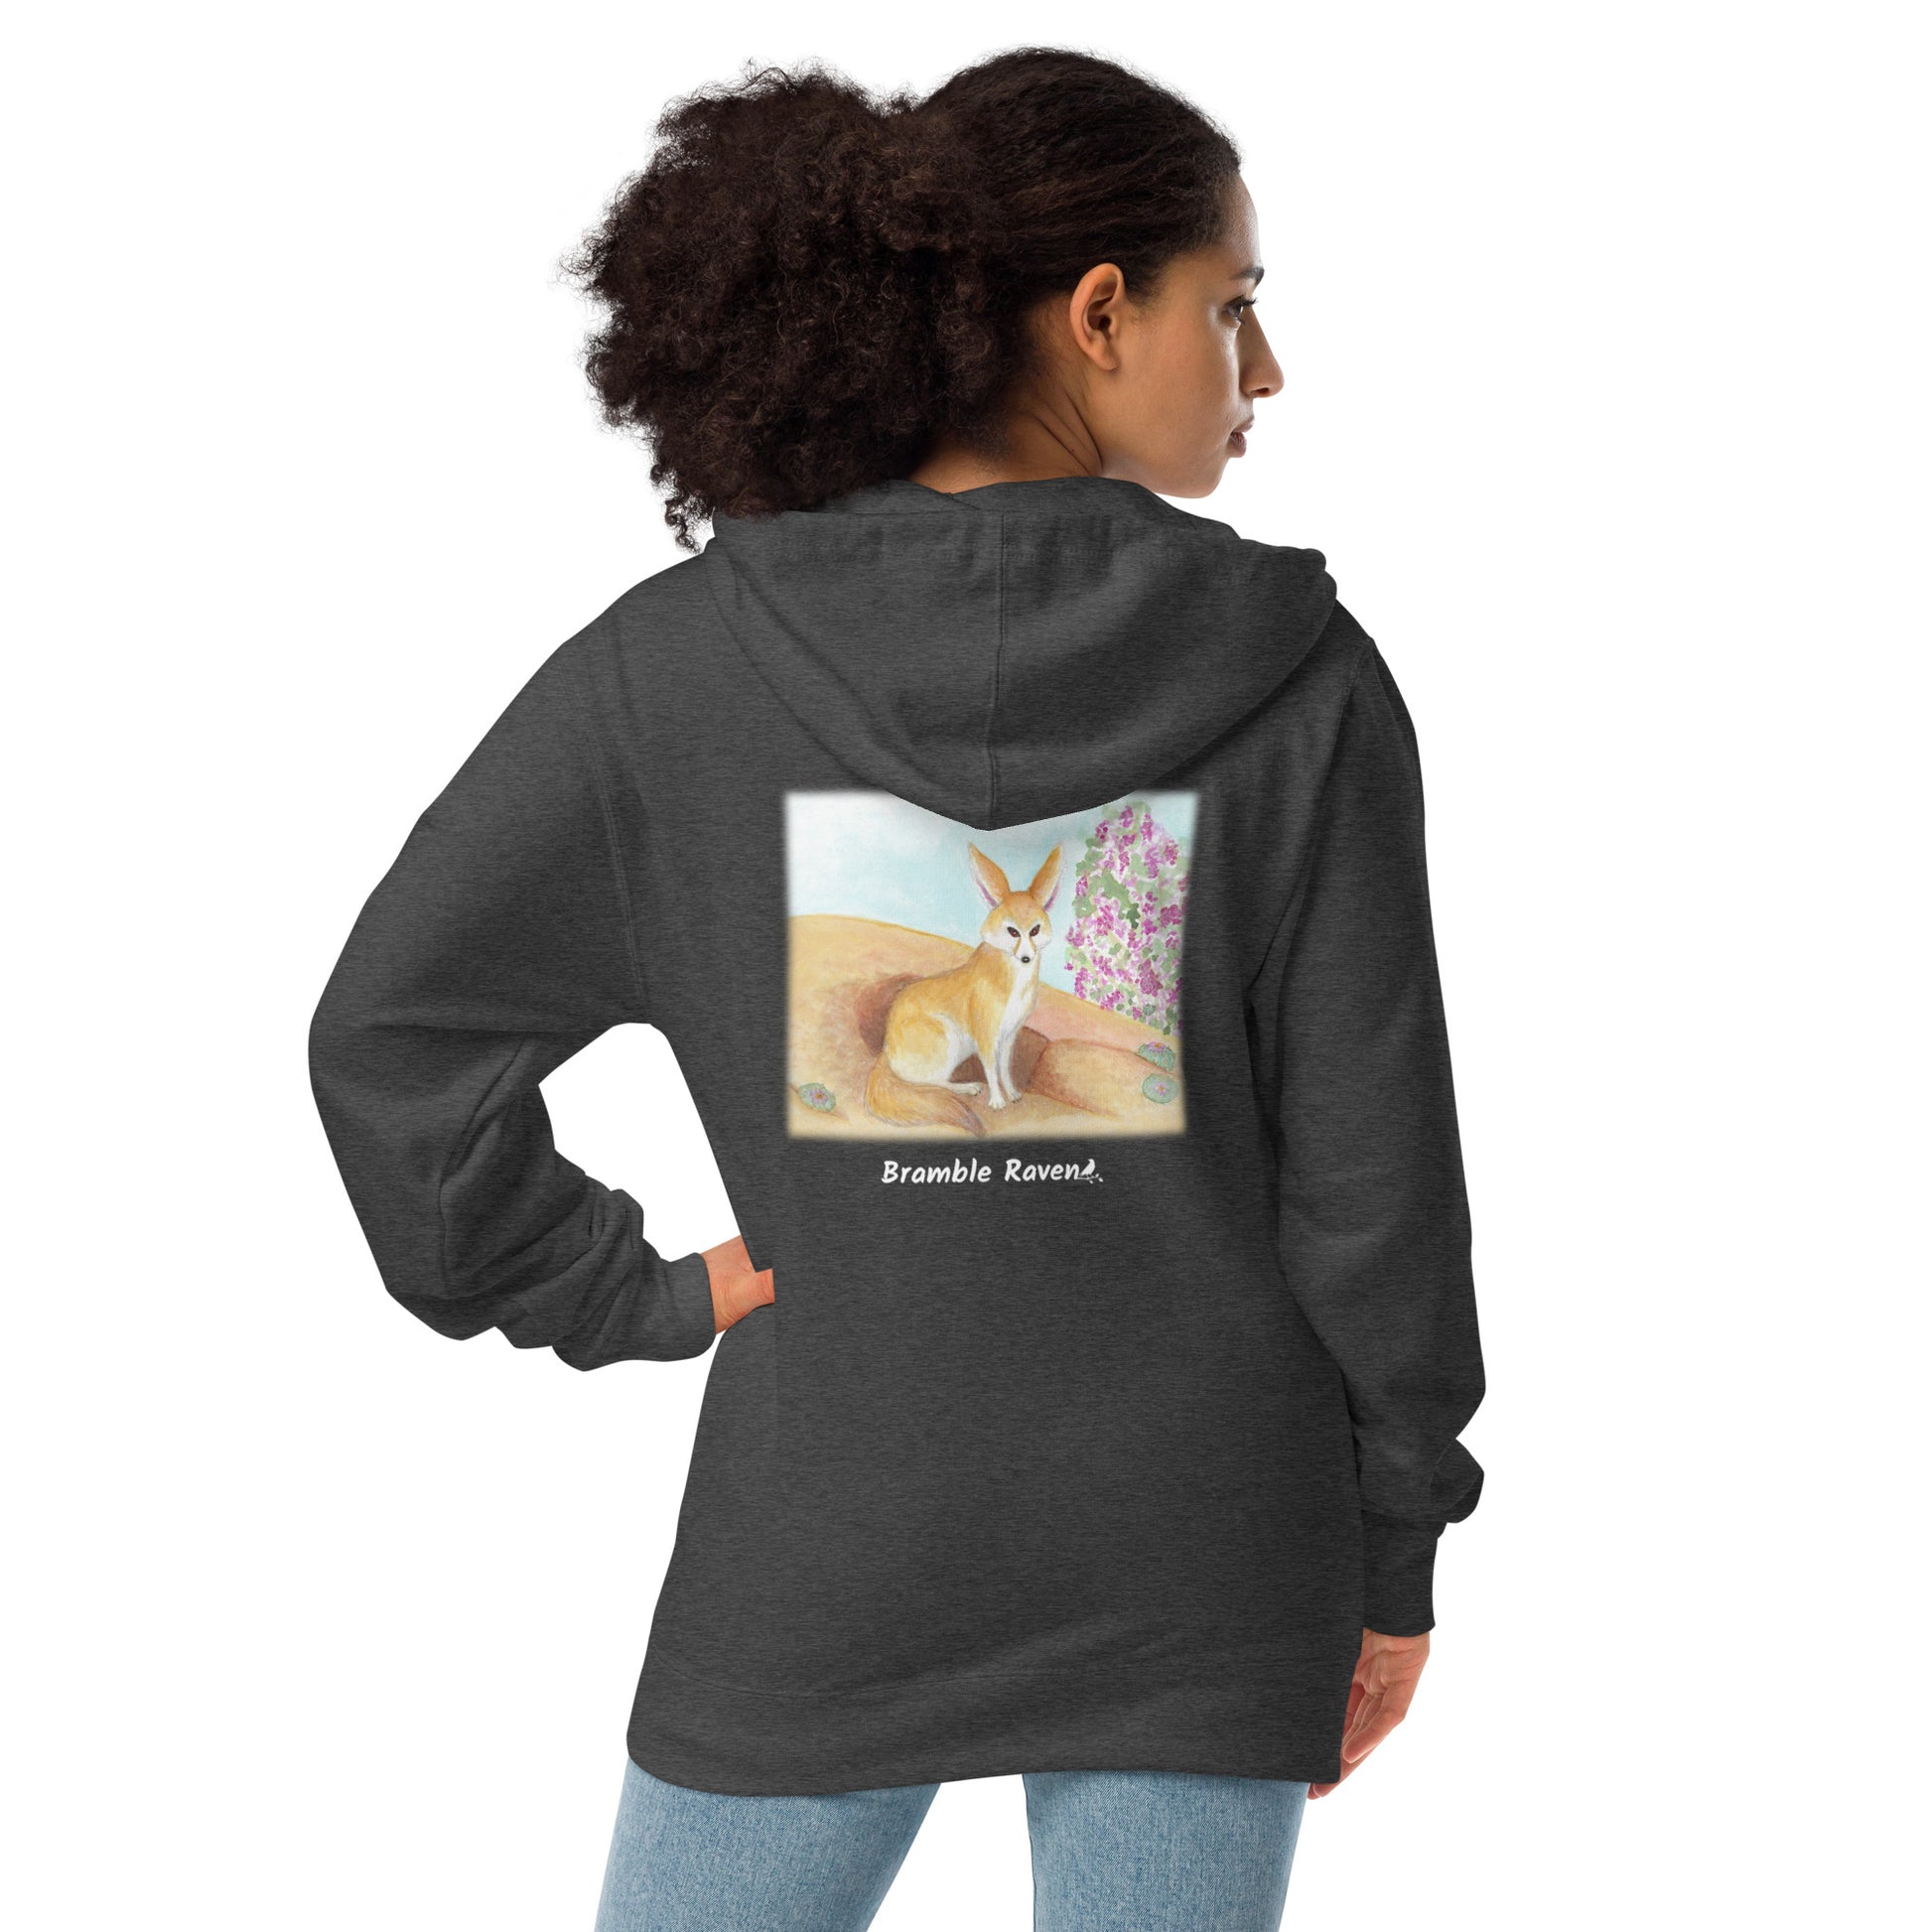 Unisex fleece-lined zip-up charcoal heather grey colored hoodie. Features original watercolor painting of a fennec fox in the desert on the back of the hoodie. Shown on female model.